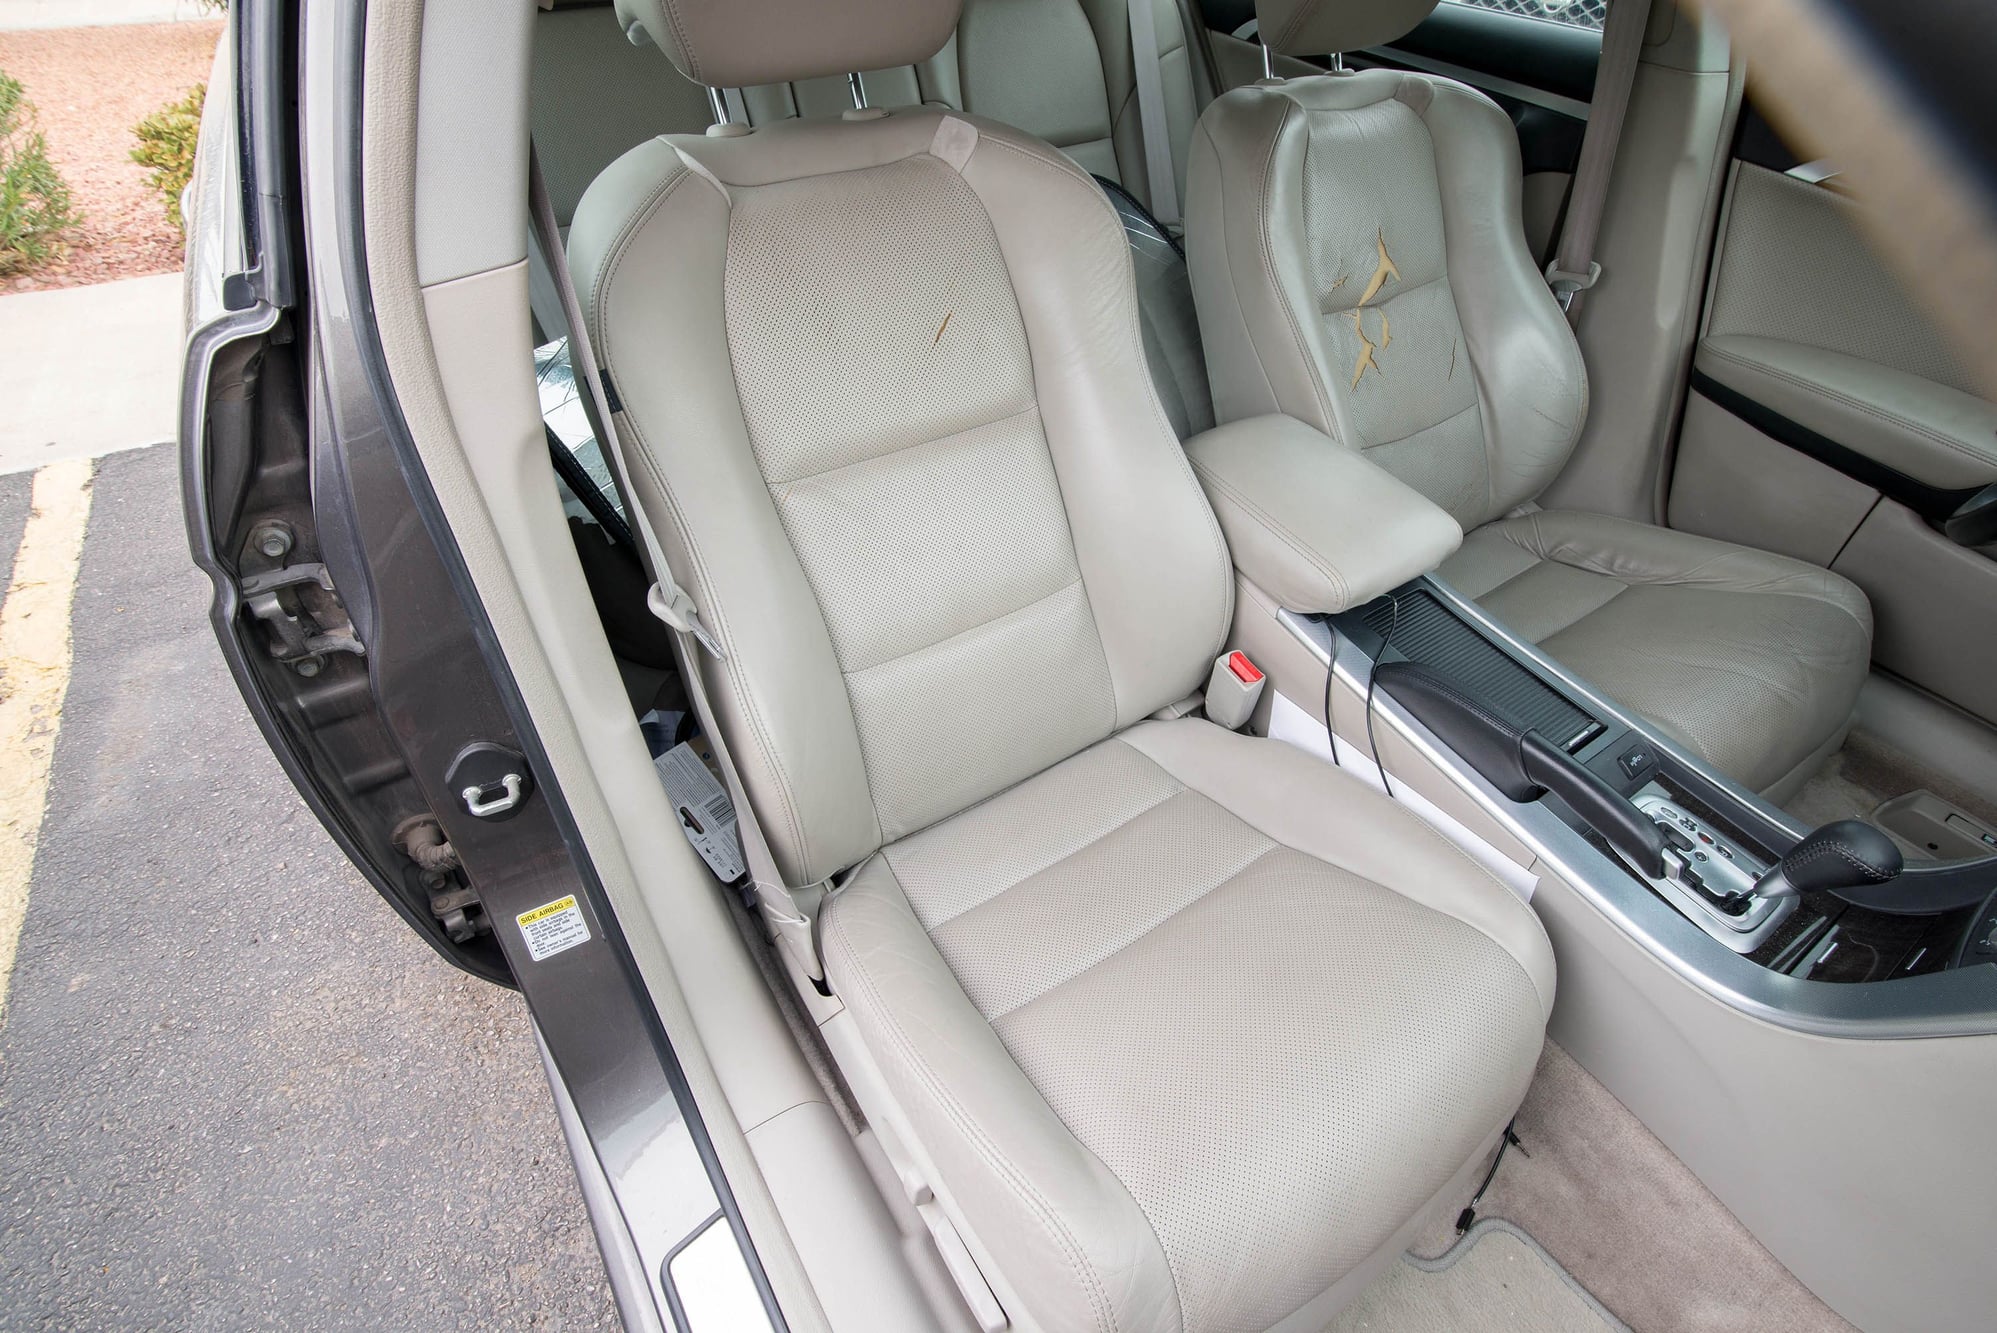 FS: Original perforated leather seat covers off a 2008 Acura TL